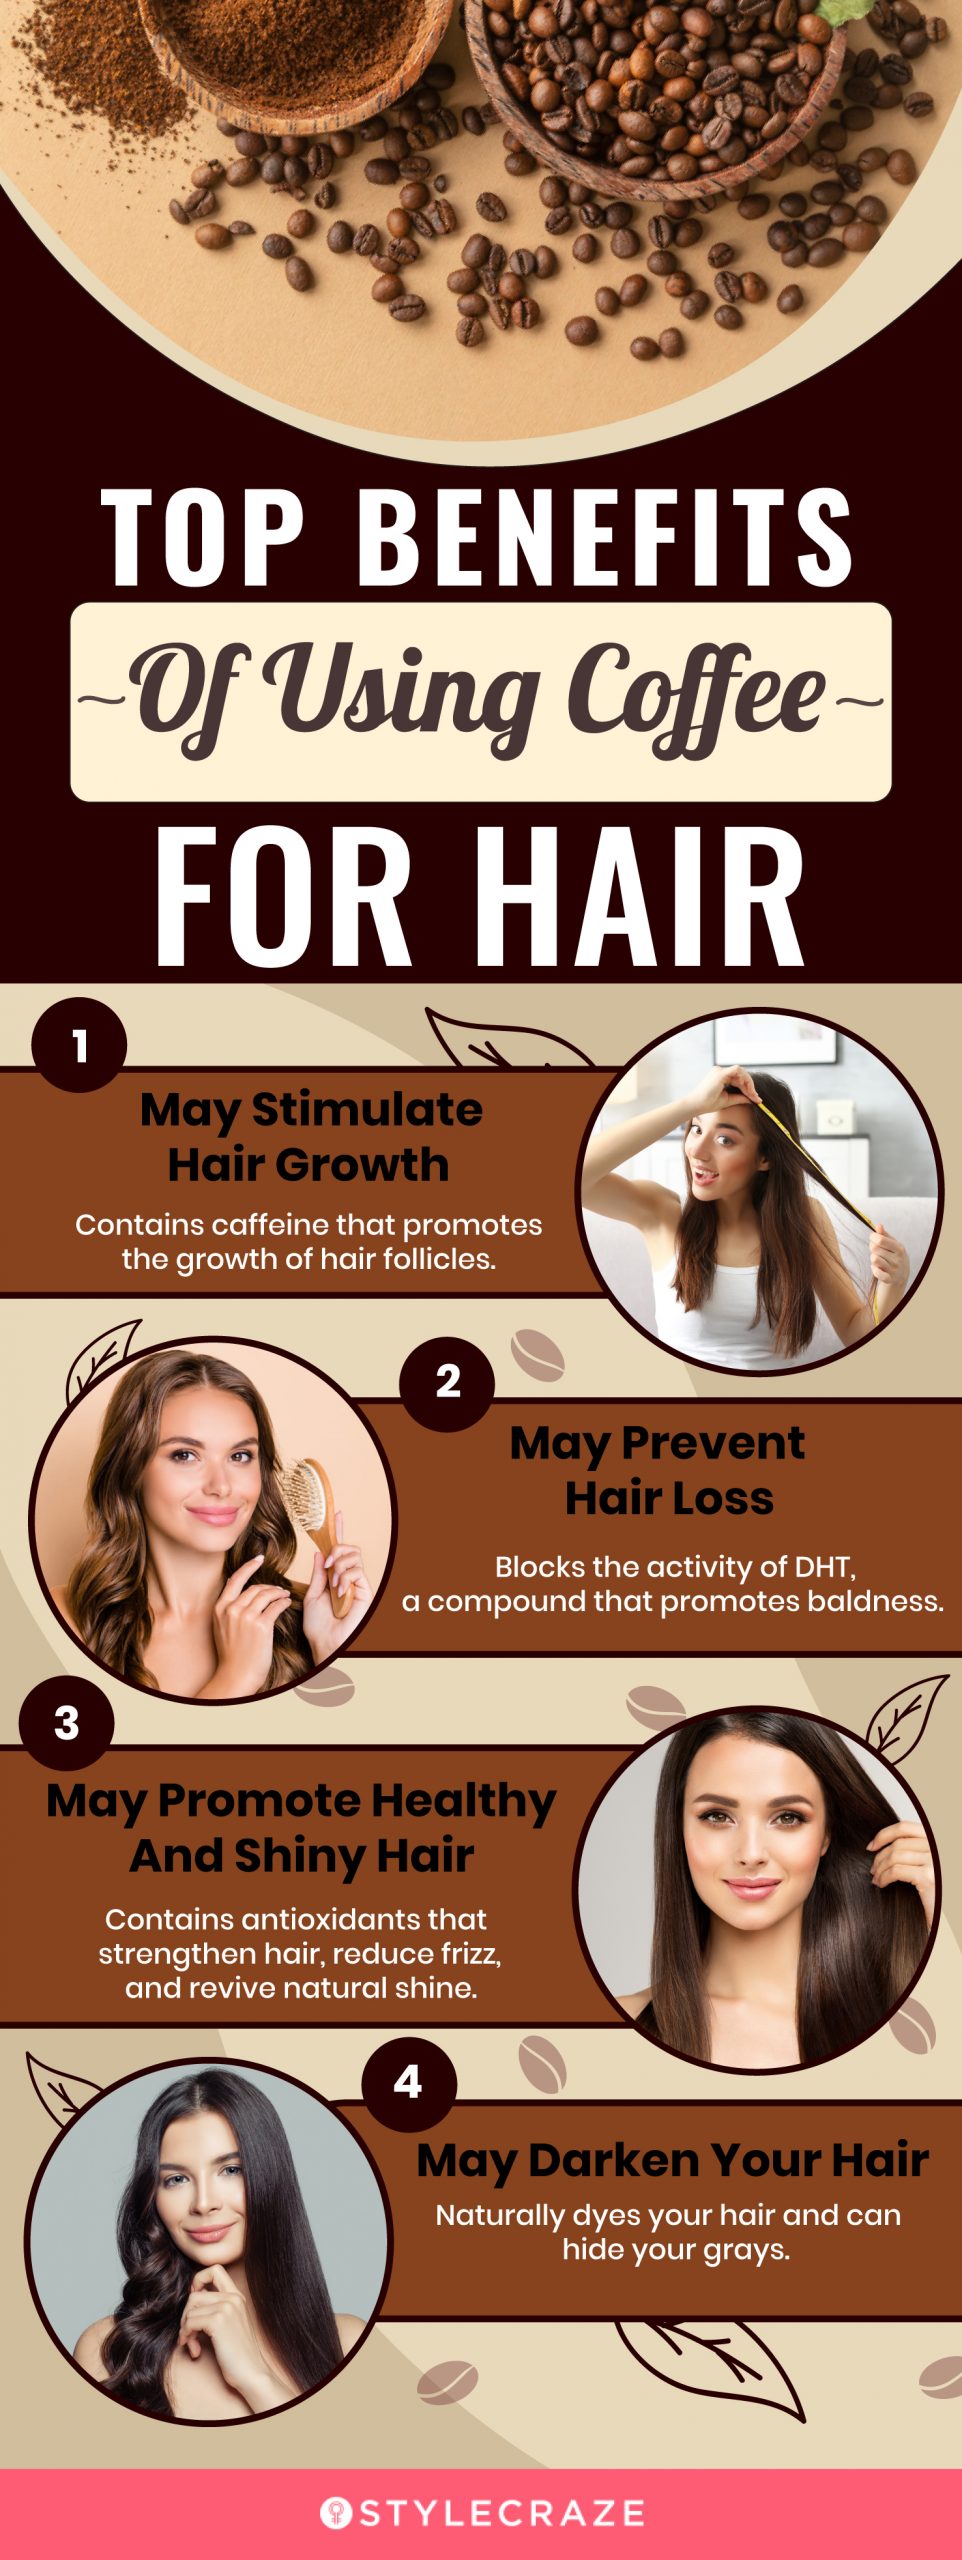 top benefits of using coffee for hair [infographic]